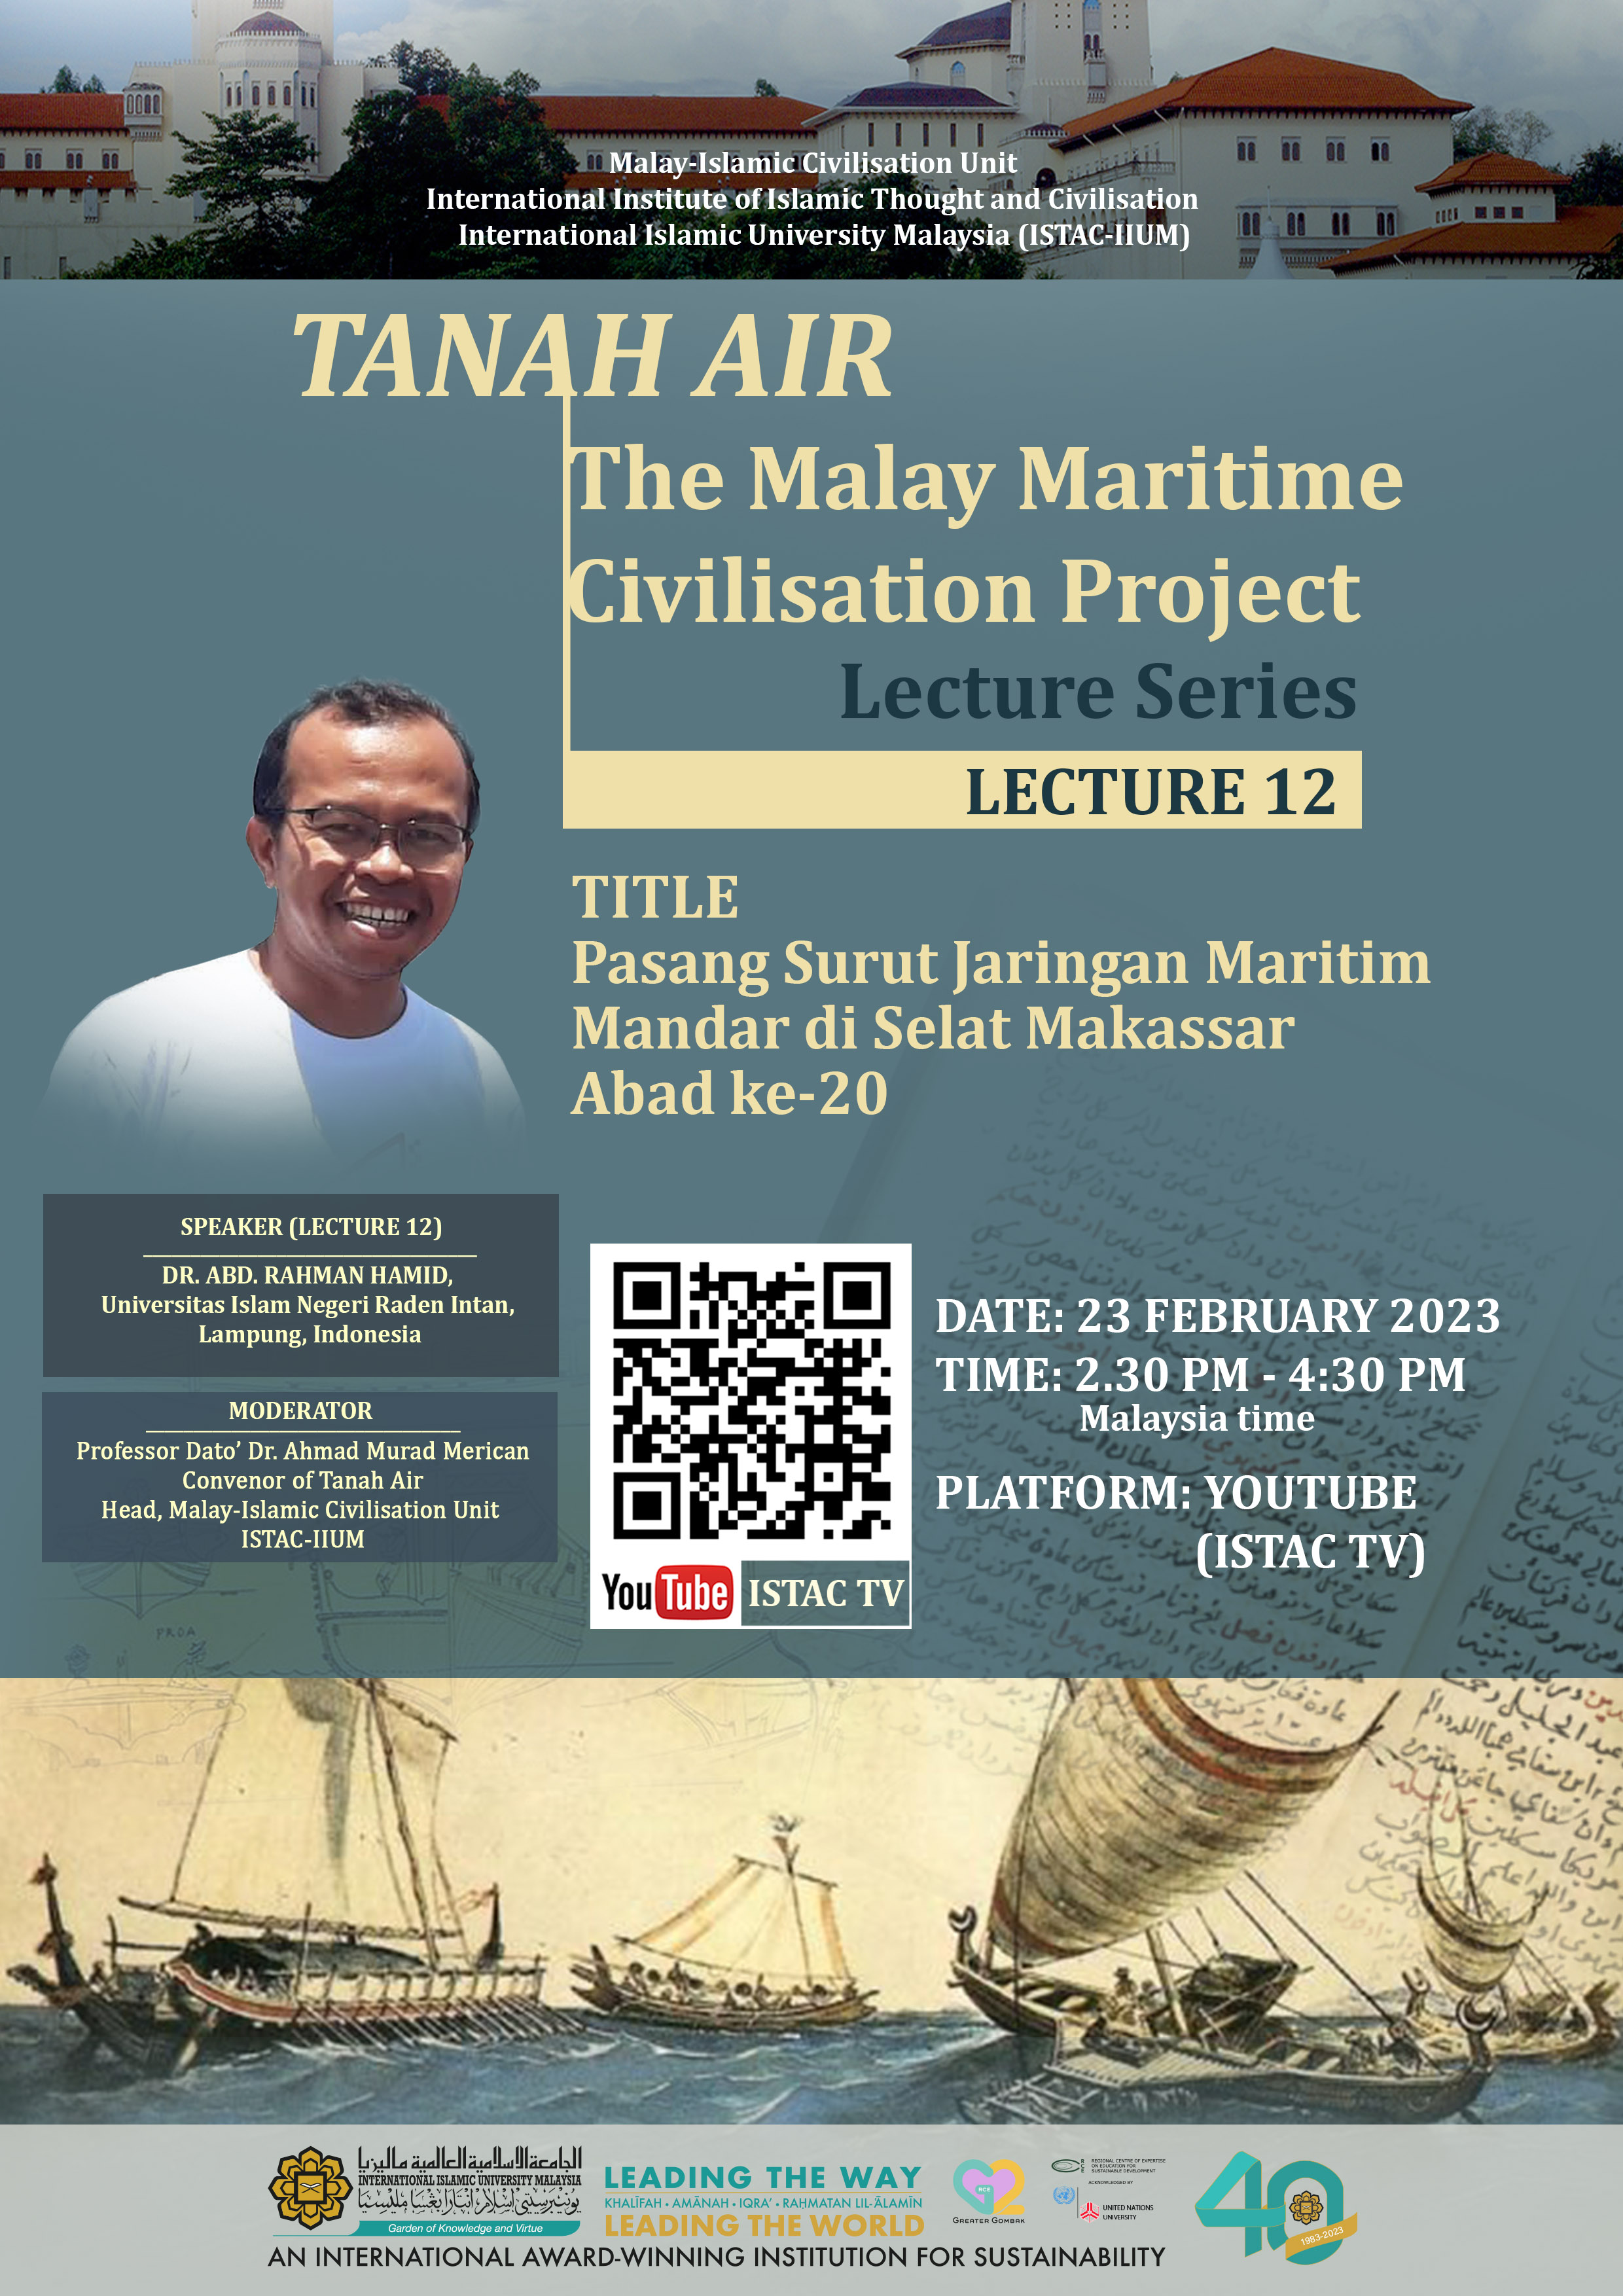 THE TWELFTH LECTURE OF TANAH AIR: MALAY MARITIME CIVILISATION PROJECT